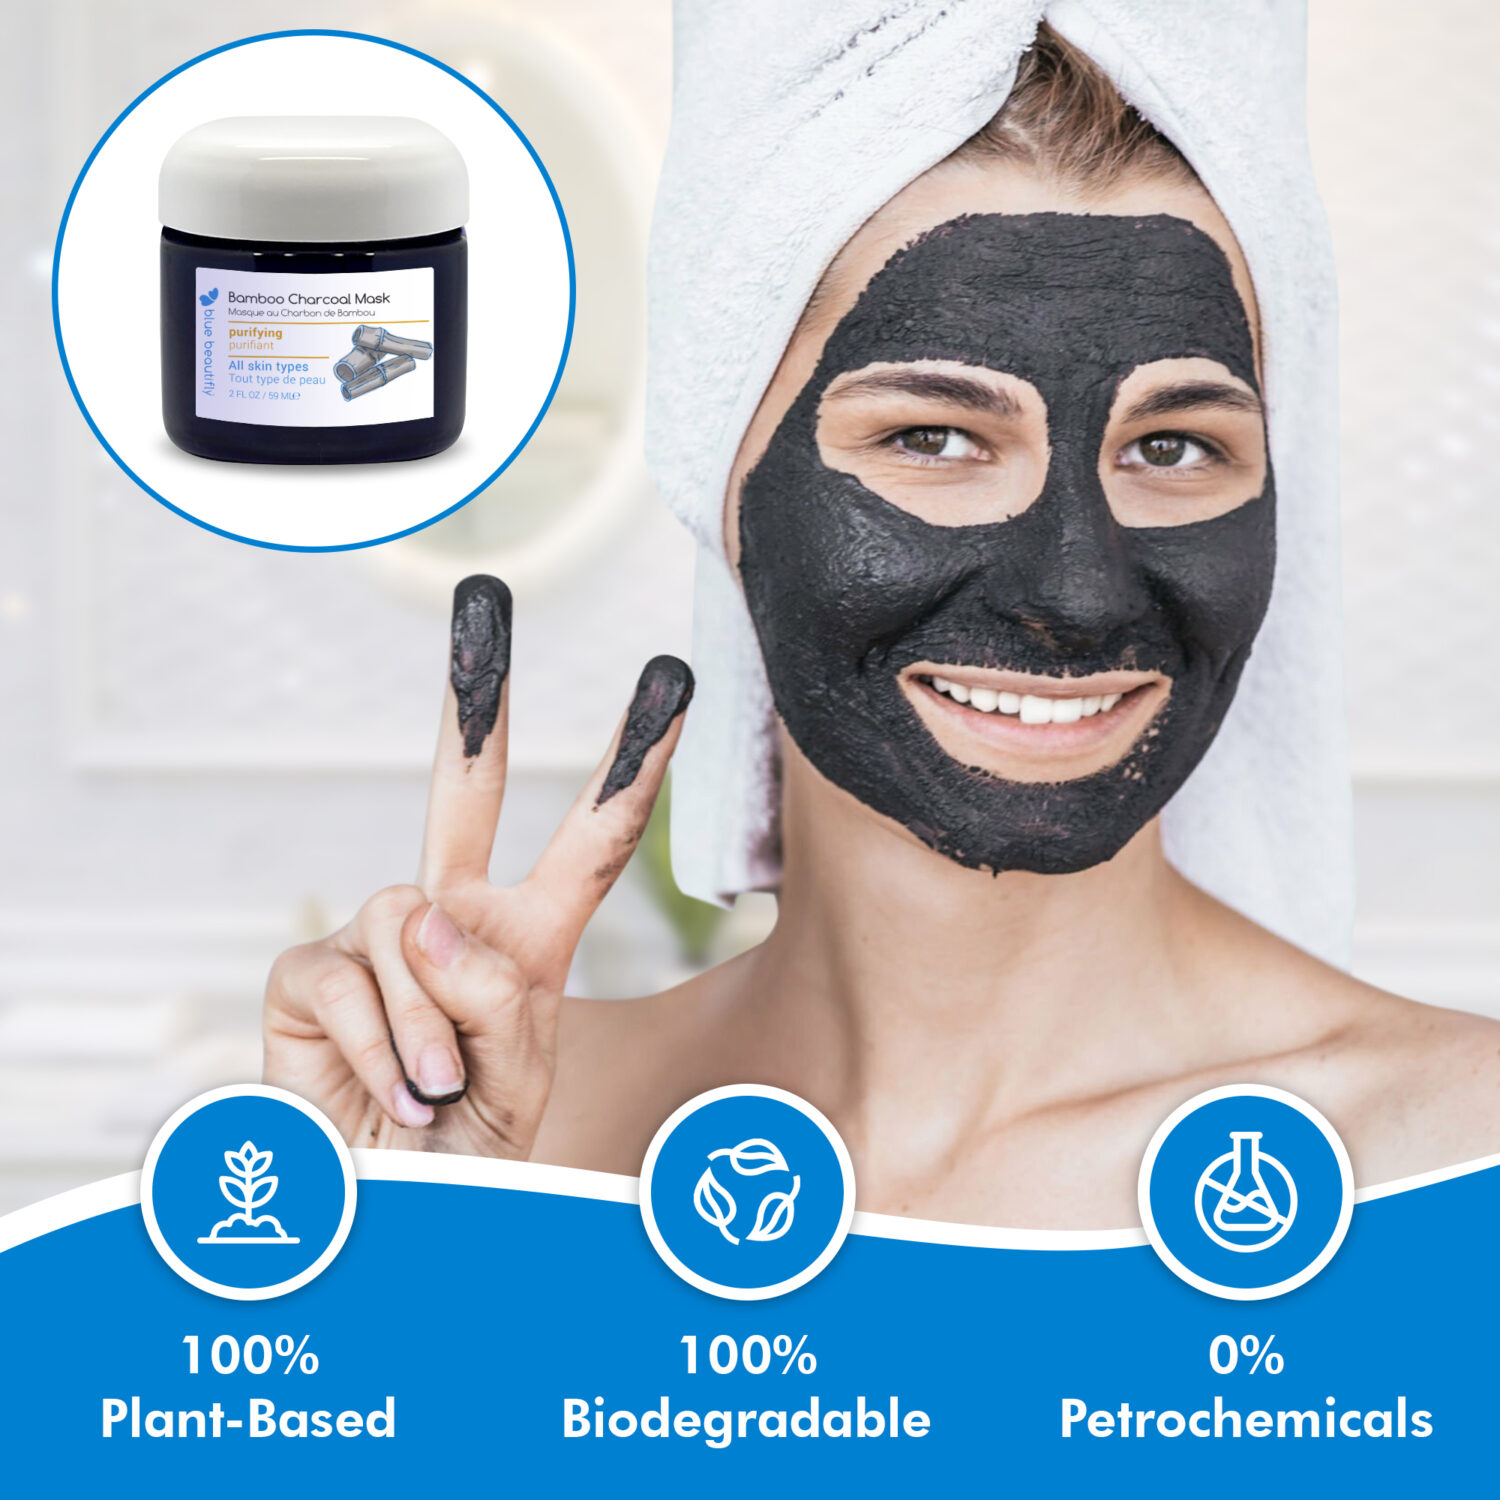 Blue Beautifly Bamboo Charcoal Mask is 100% plant-based and biodegradable and contains no petrochemicals or toxins